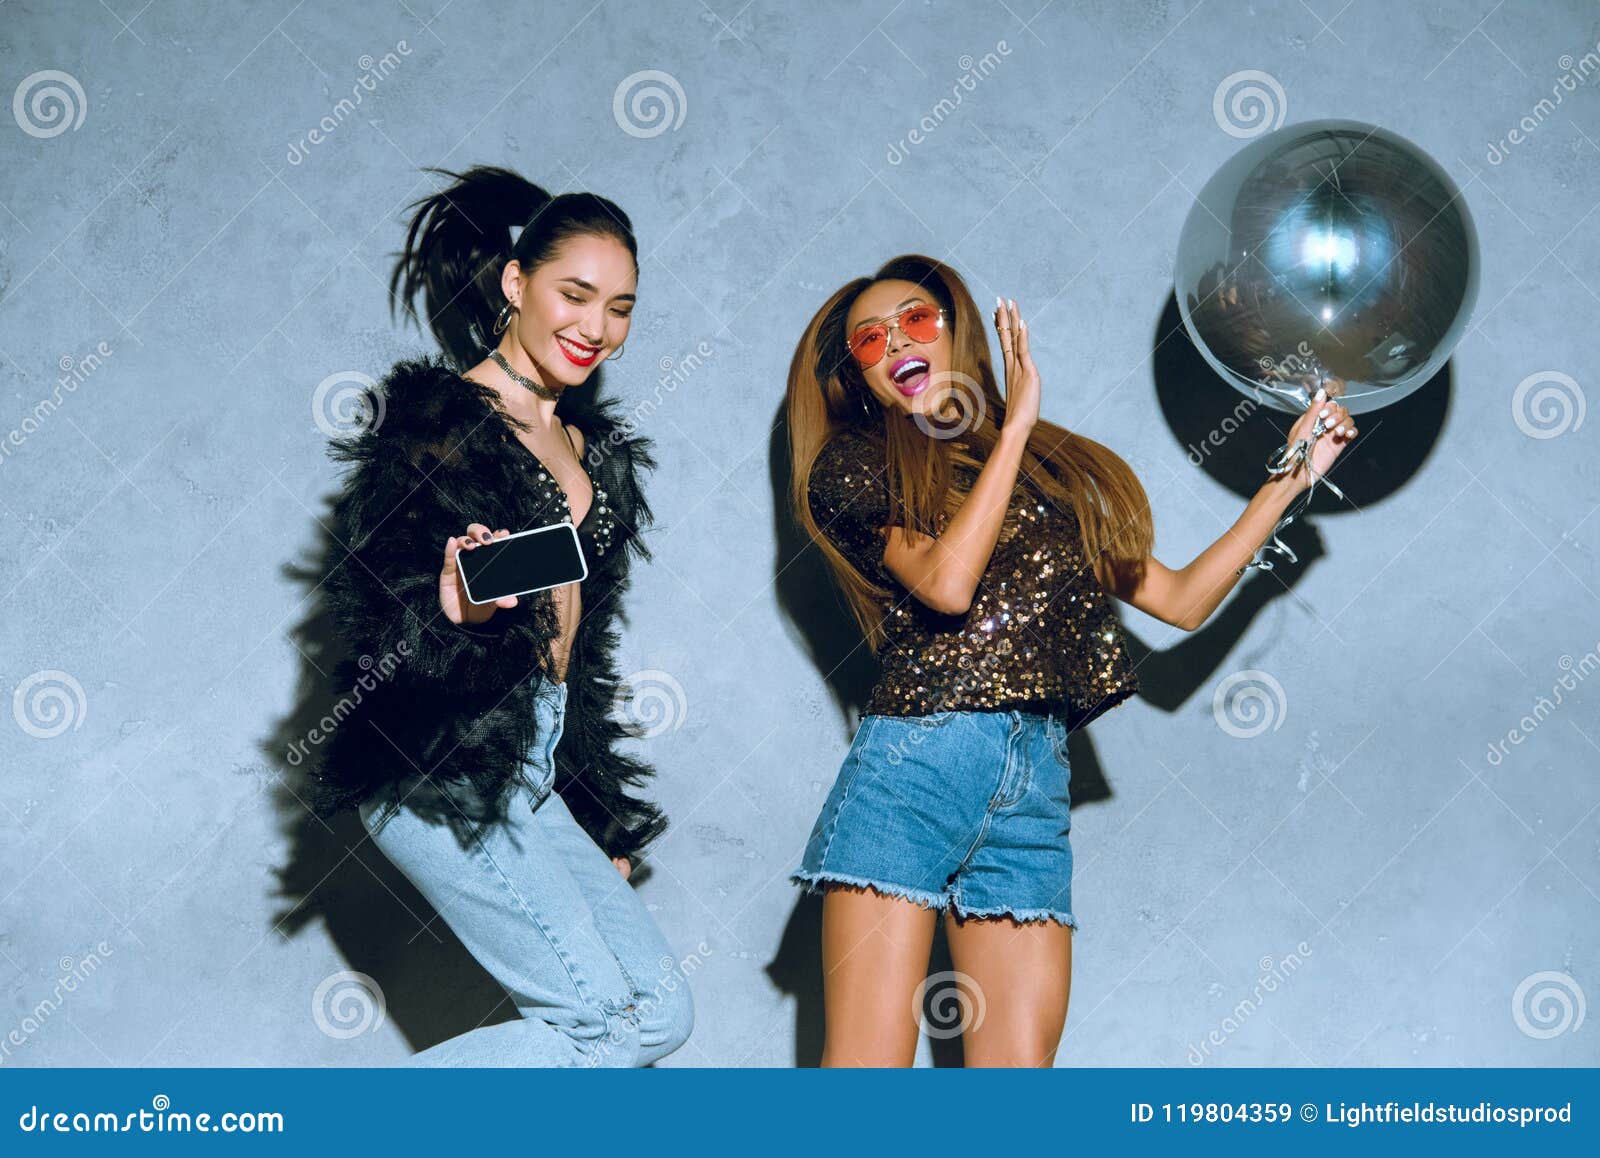 fashionable multiethnic women with smartphone and balloon having fun together